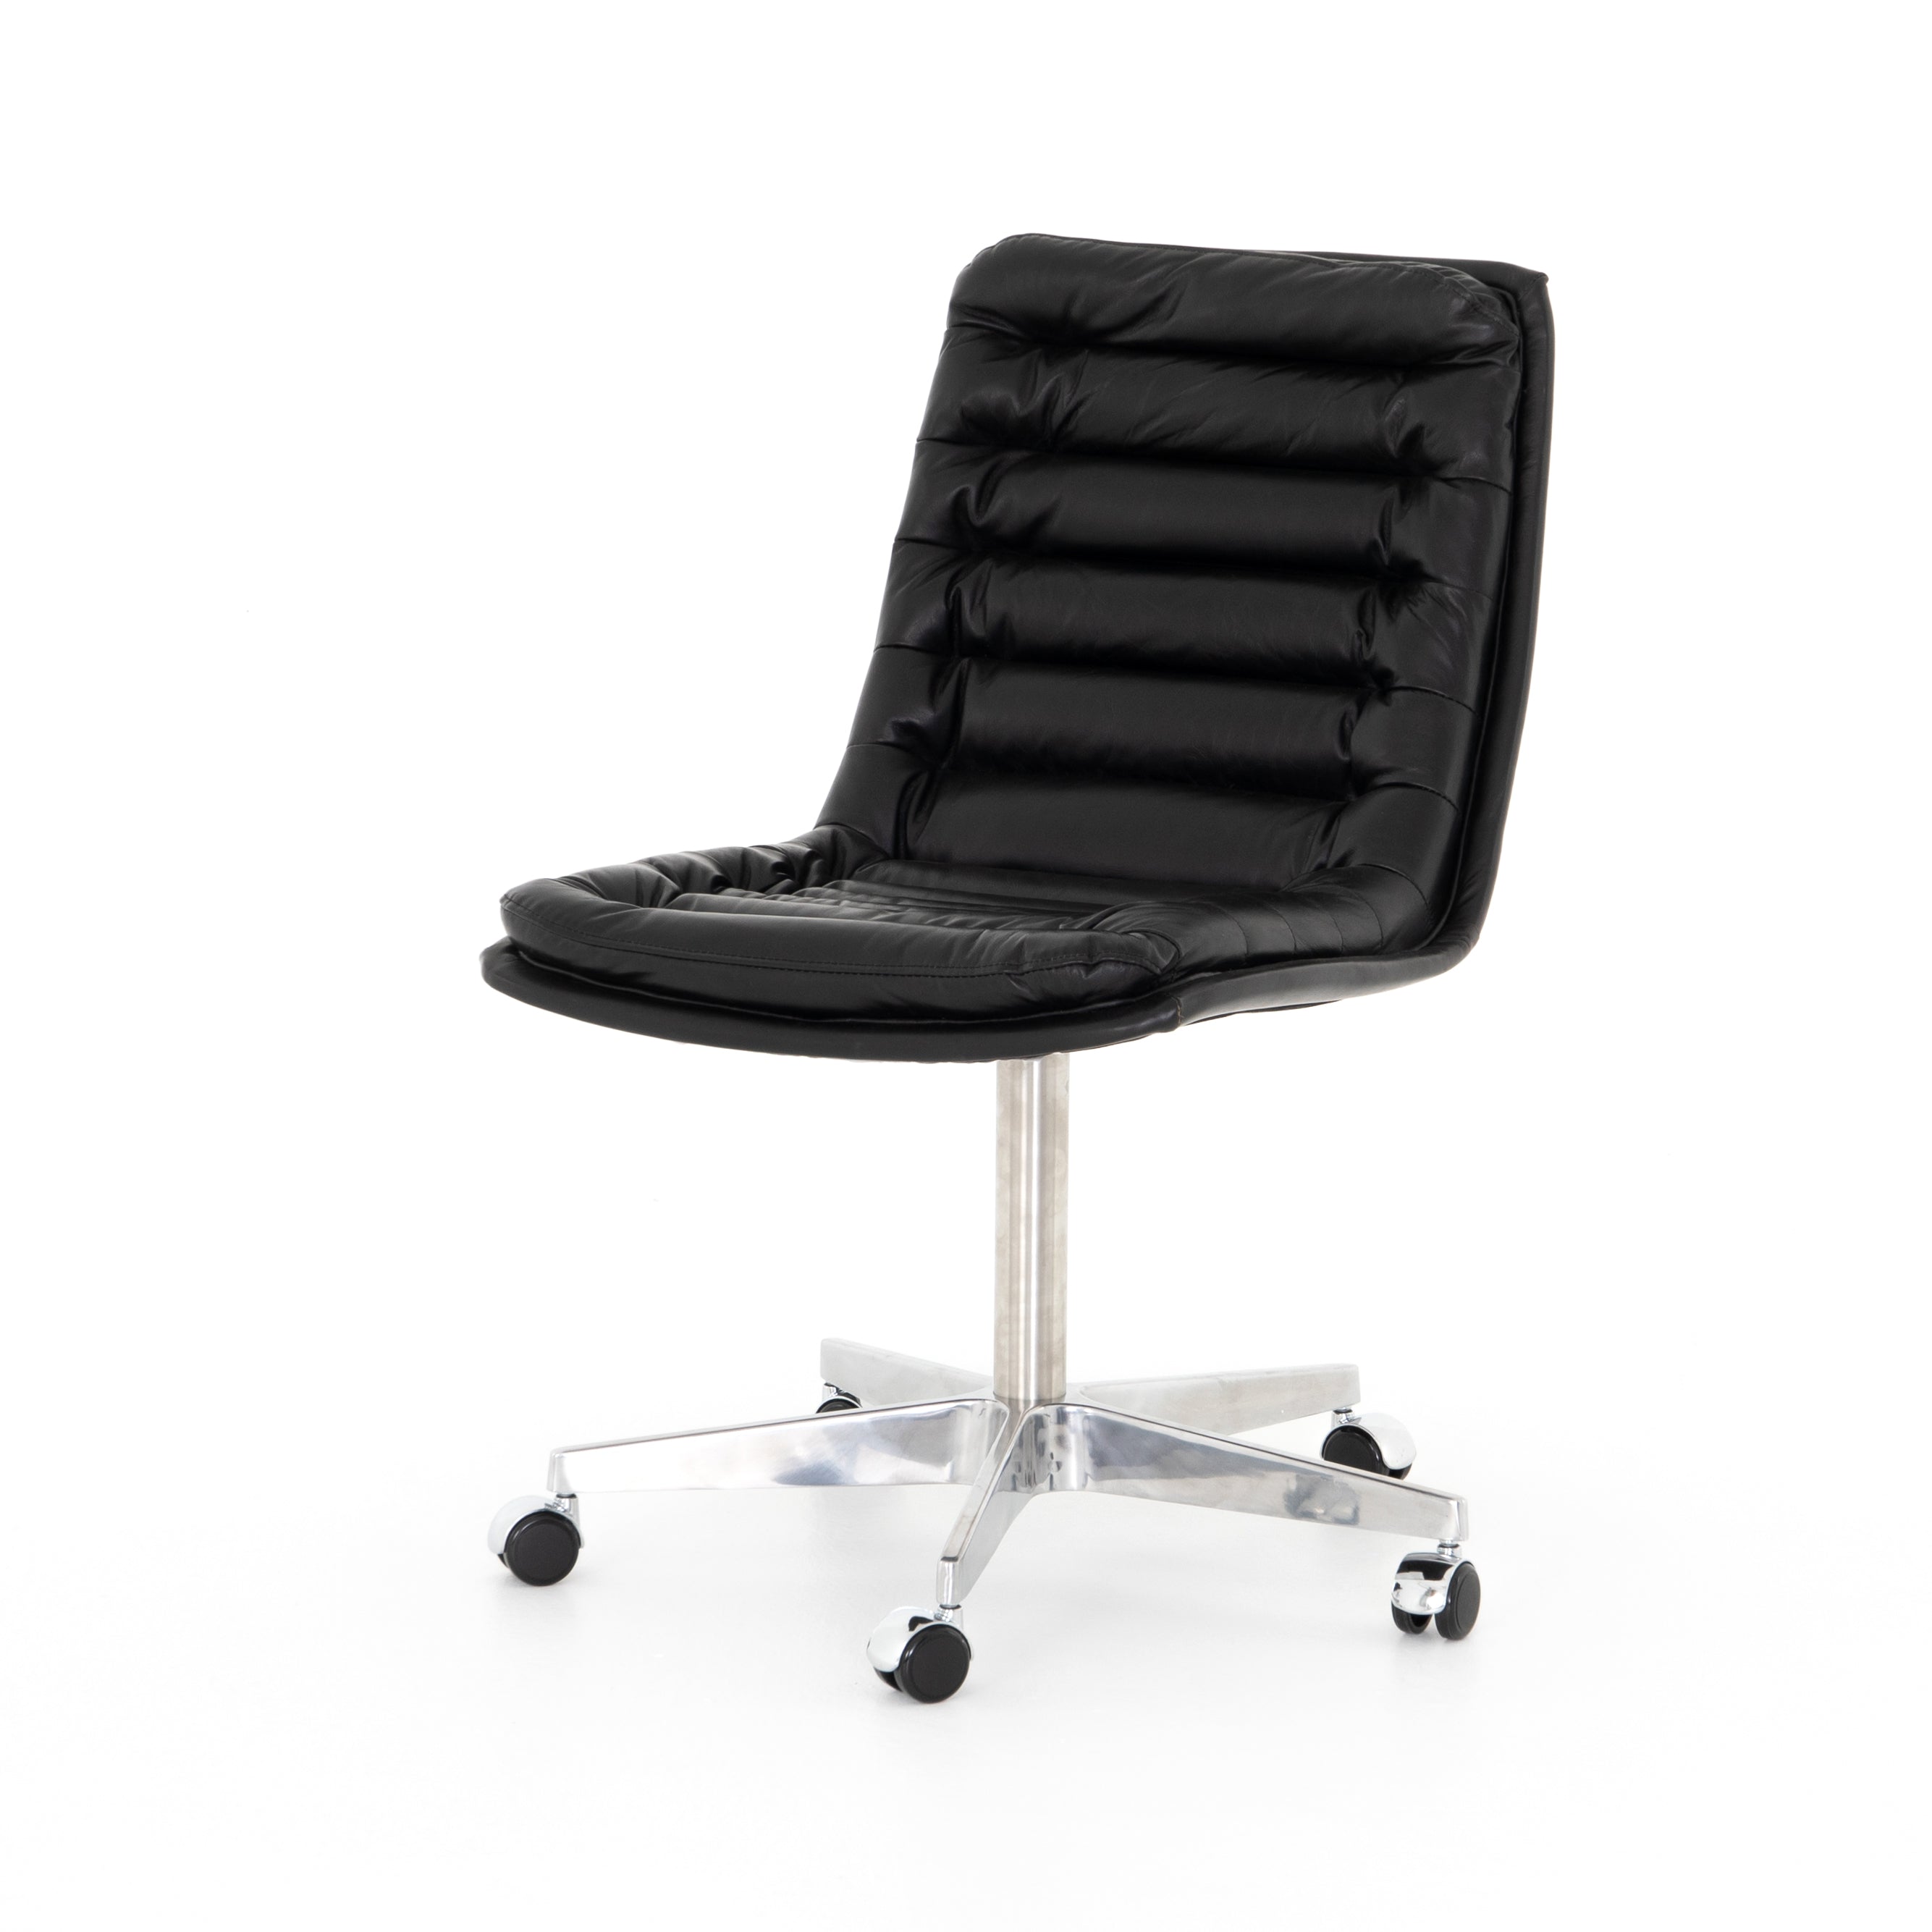 Paired back and fashion-forward, this minimalist Malibu Desk Chair in black top-grain leather offers maximum comfort. Inspired by workspaces of the ‘50s and ‘60s. Stainless steel casters make for stylish ease in the workplace. Height not adjustable.  Overall Dimensions: 20.75"w x 26.25"d x 34.25"h Seat Depth: 16.54" Seat Height: 19.29"